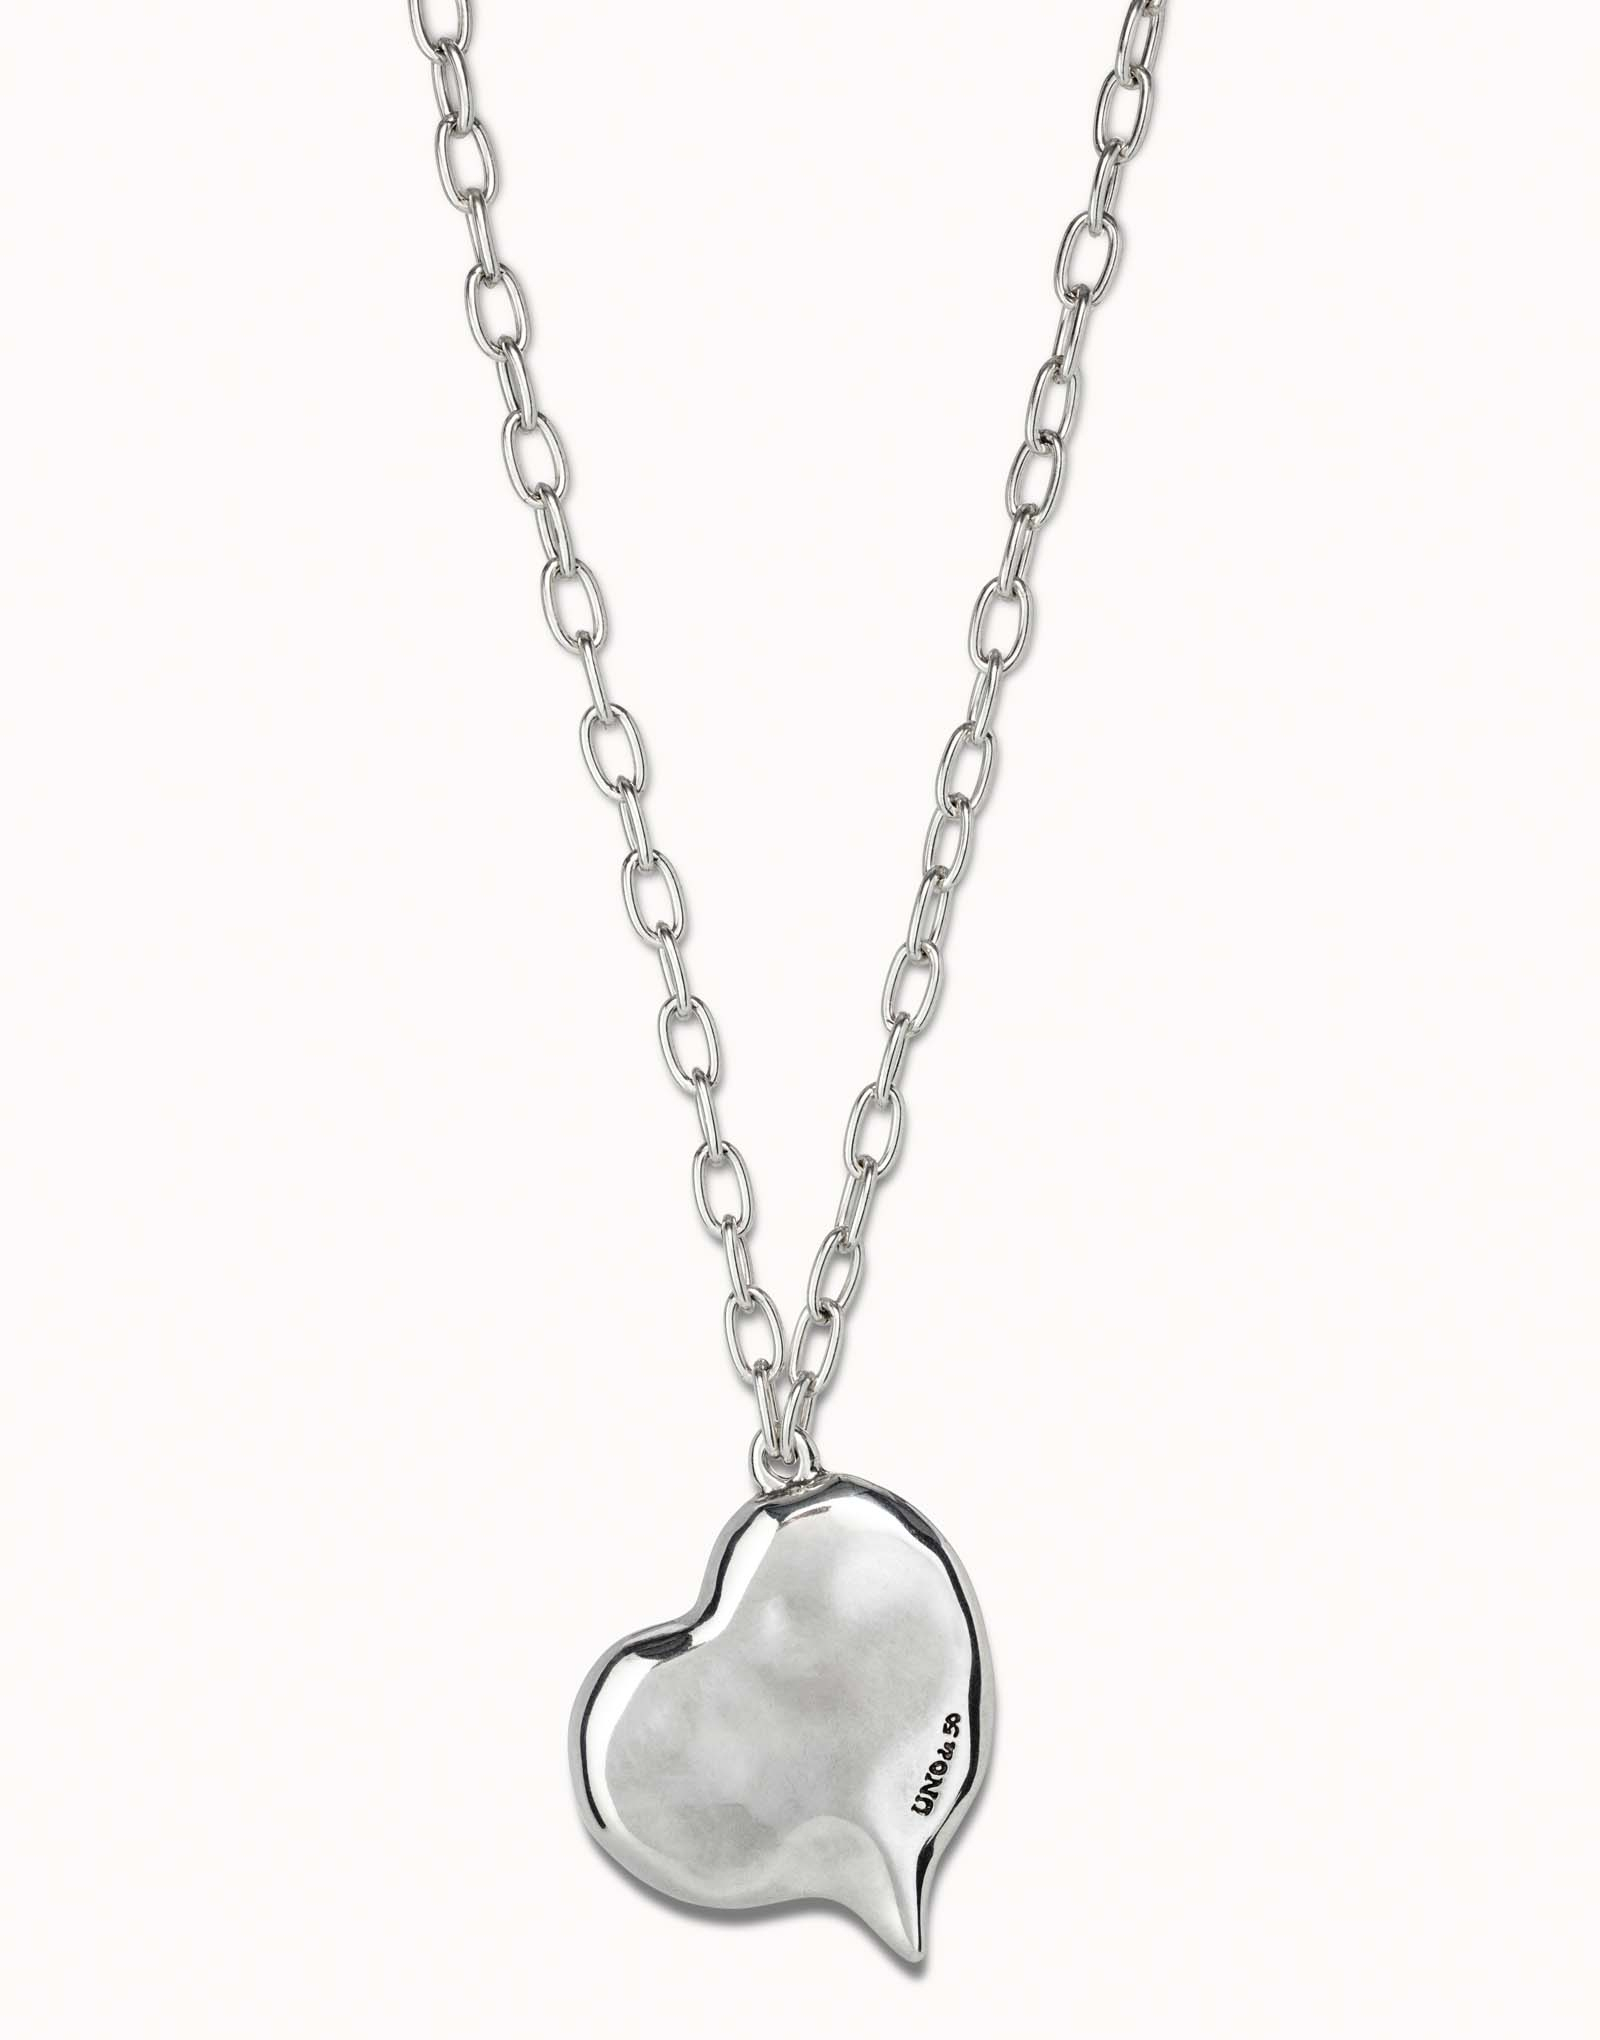 Immensity Necklace